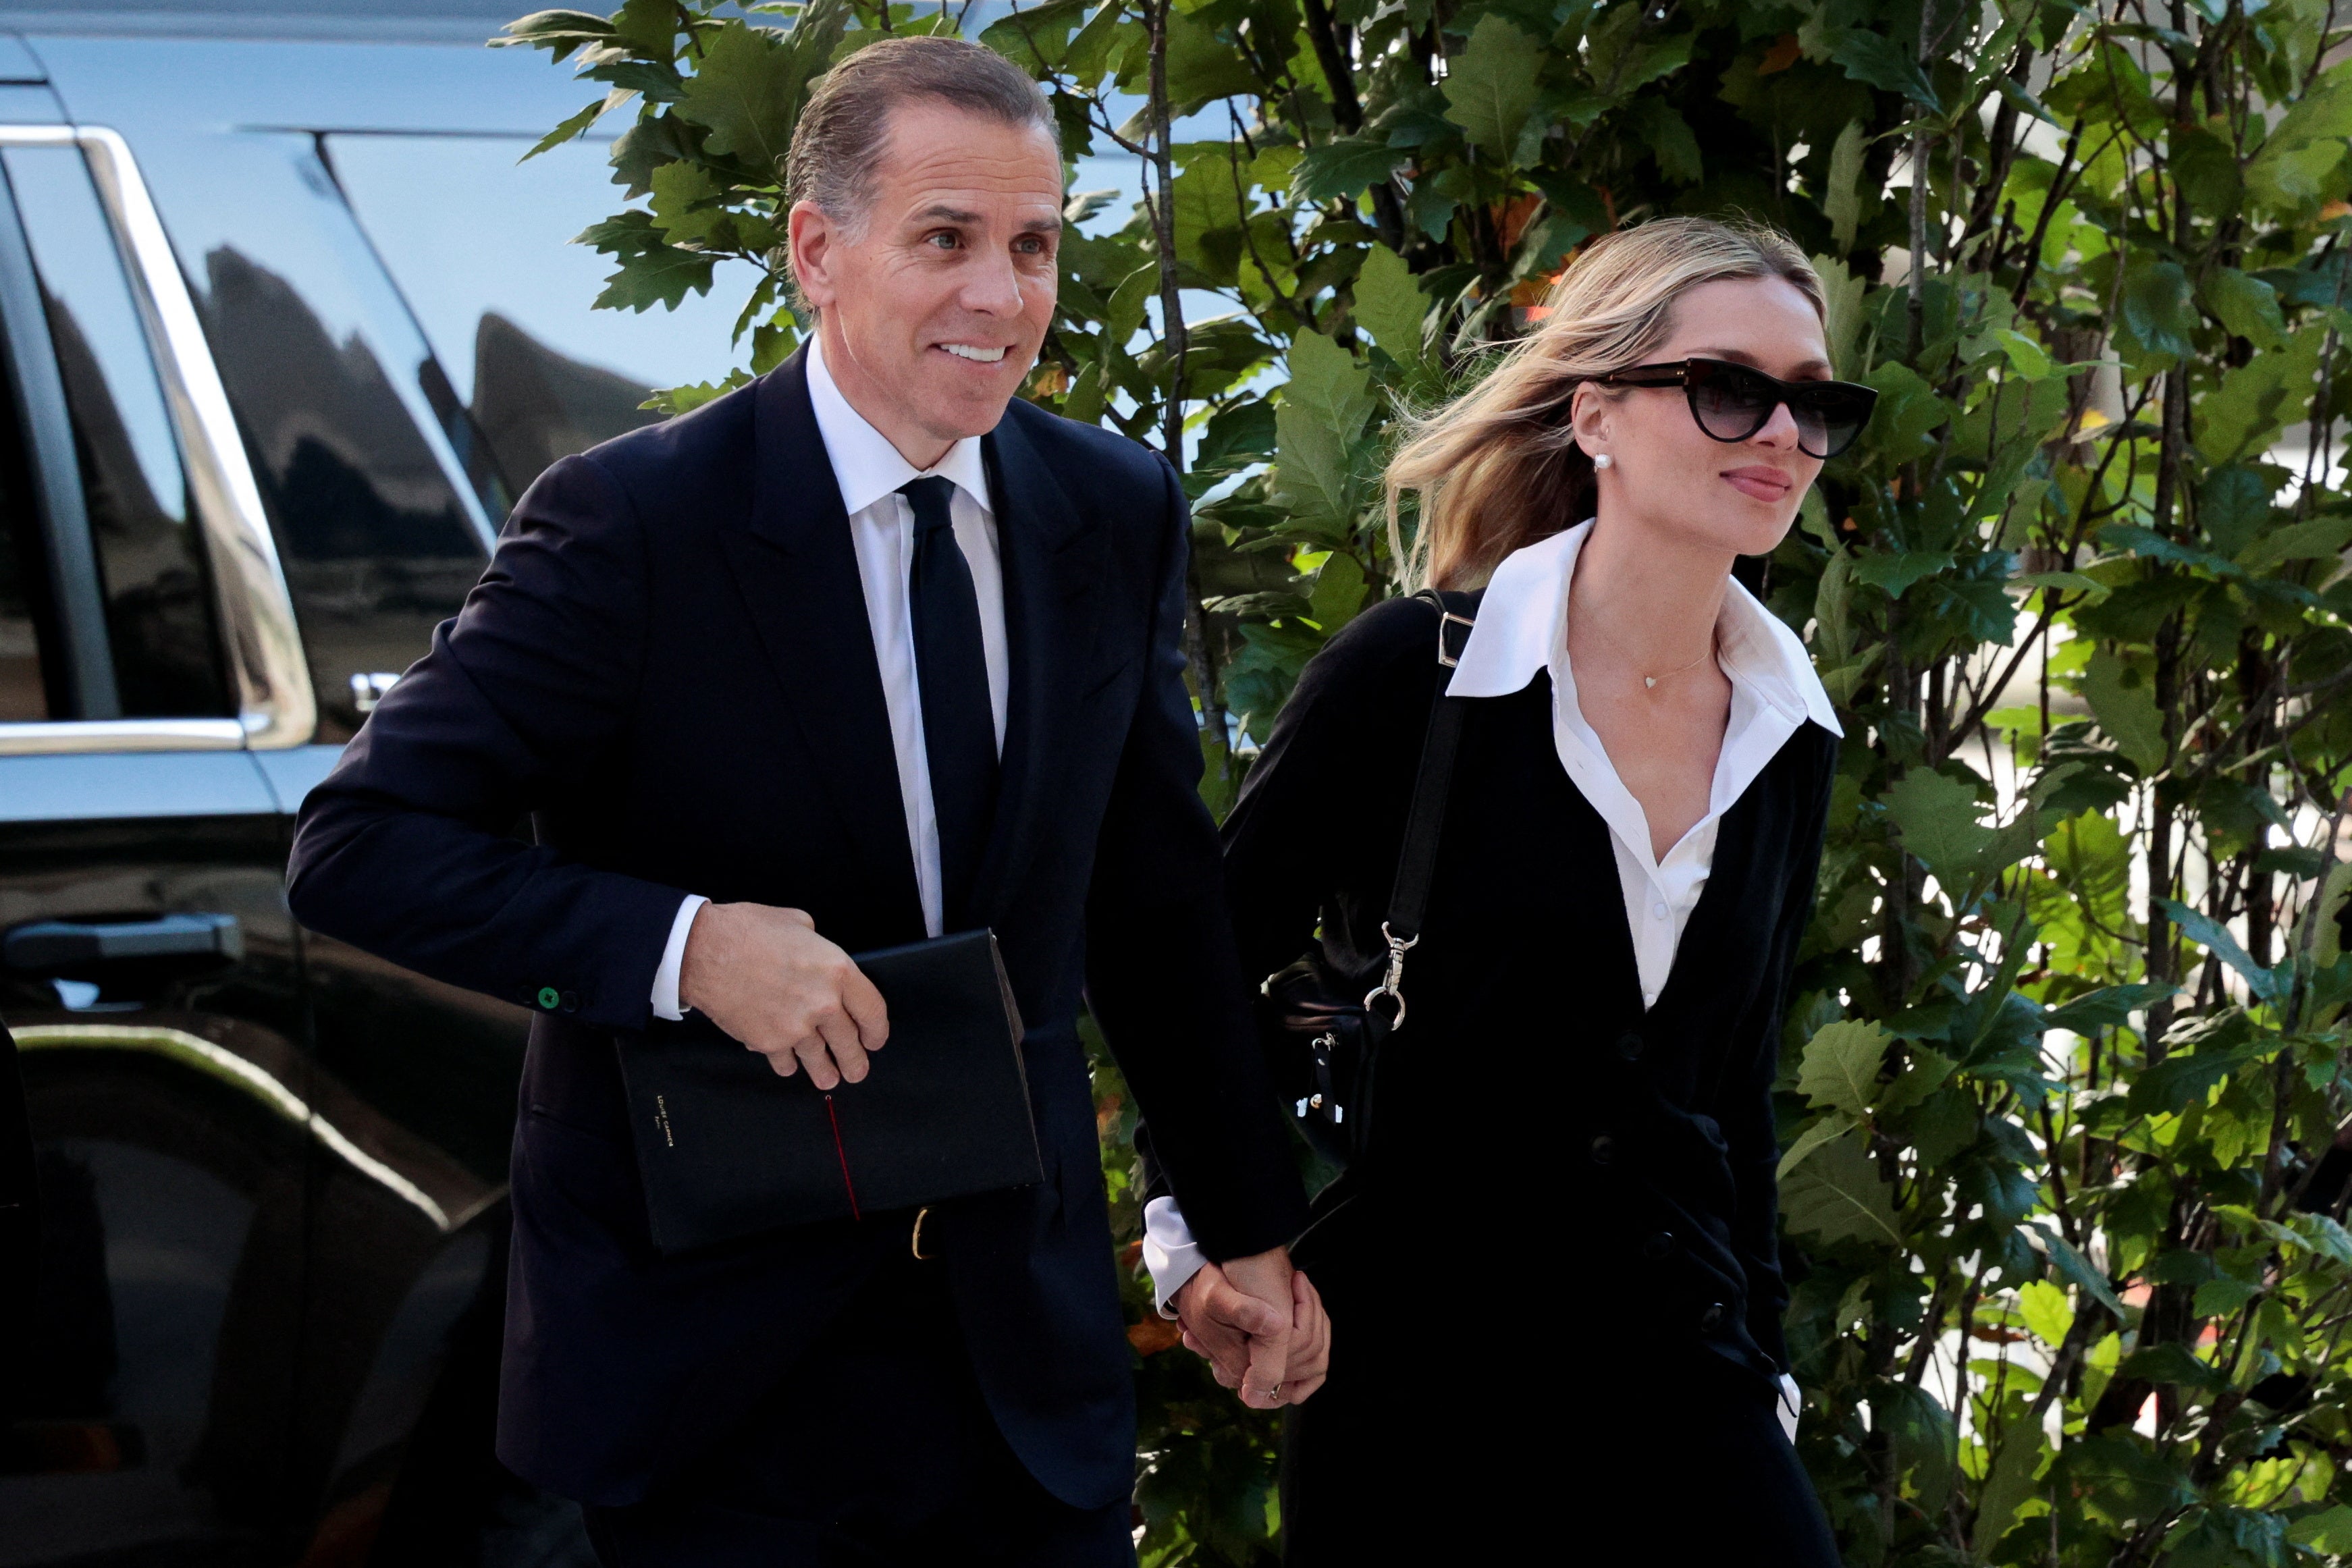 Hunter Biden, son of U.S. President Joe Biden, arrives with his wife Melissa Cohen Biden at the federal court for his trial on criminal gun charges, in Wilmington, Delaware, U.S., June 10, 2024